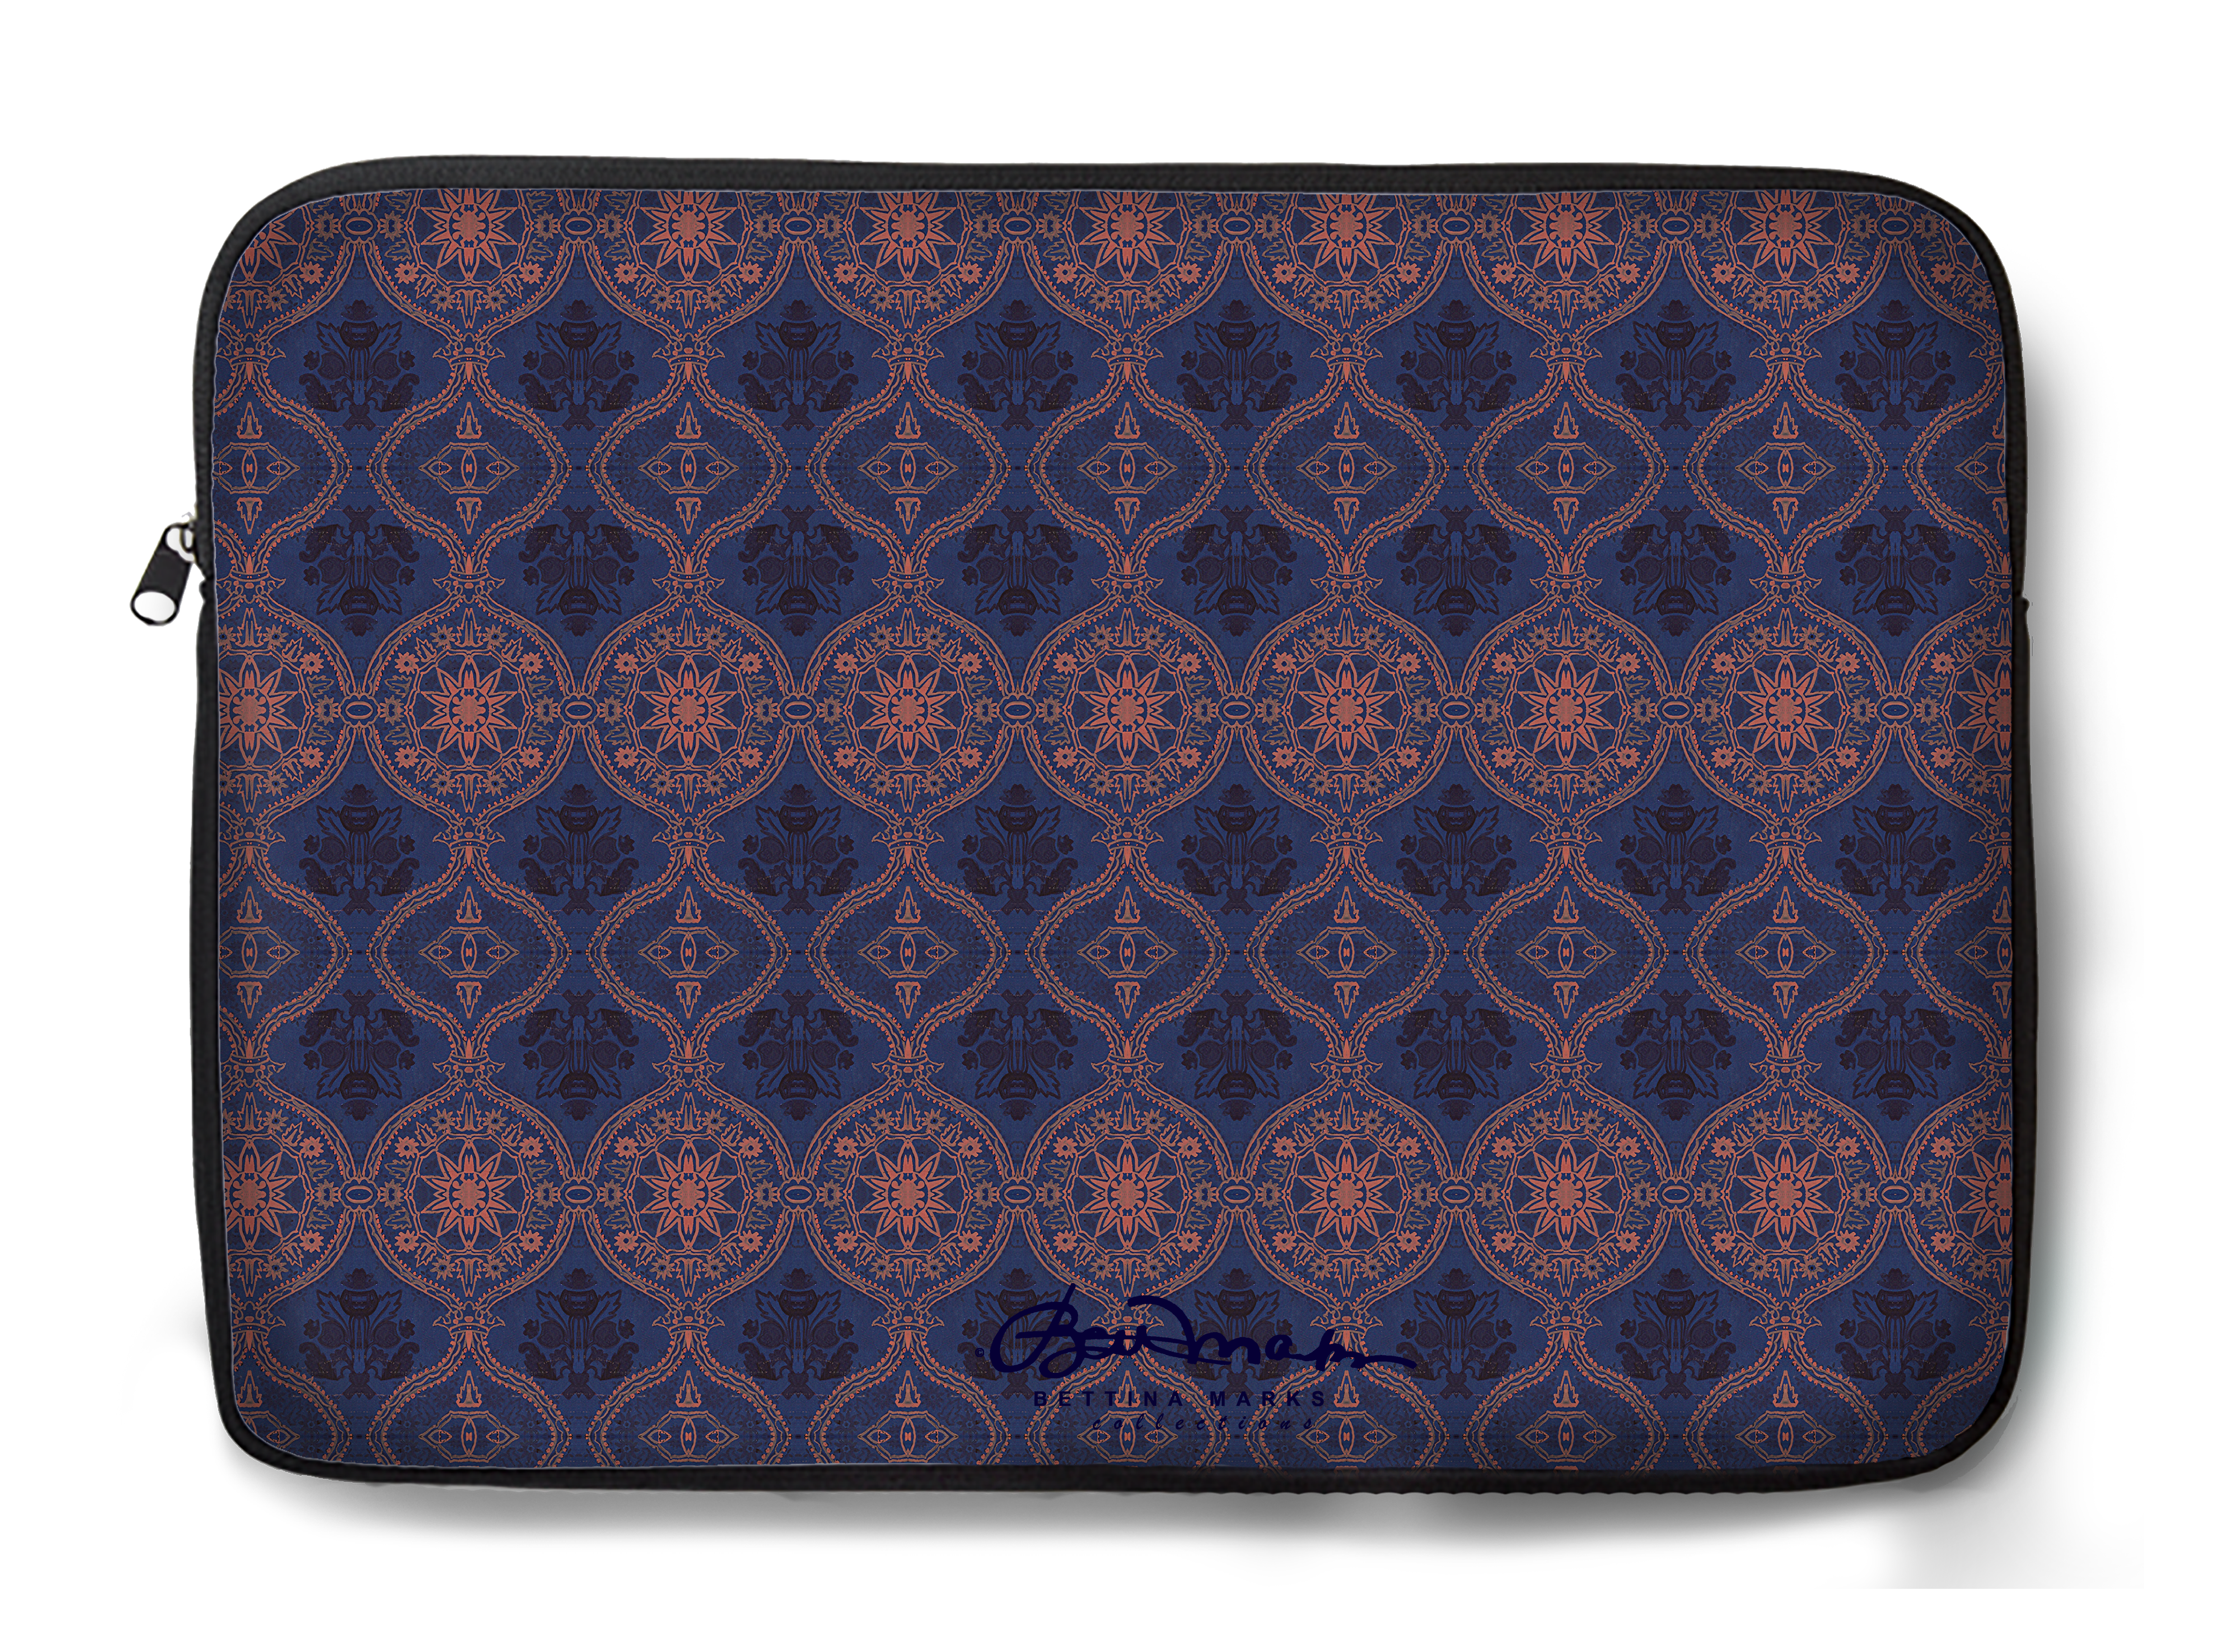 Sargasso Blue and Mellow Rose Damask Laptop Sleeve - Picture 1 of 1